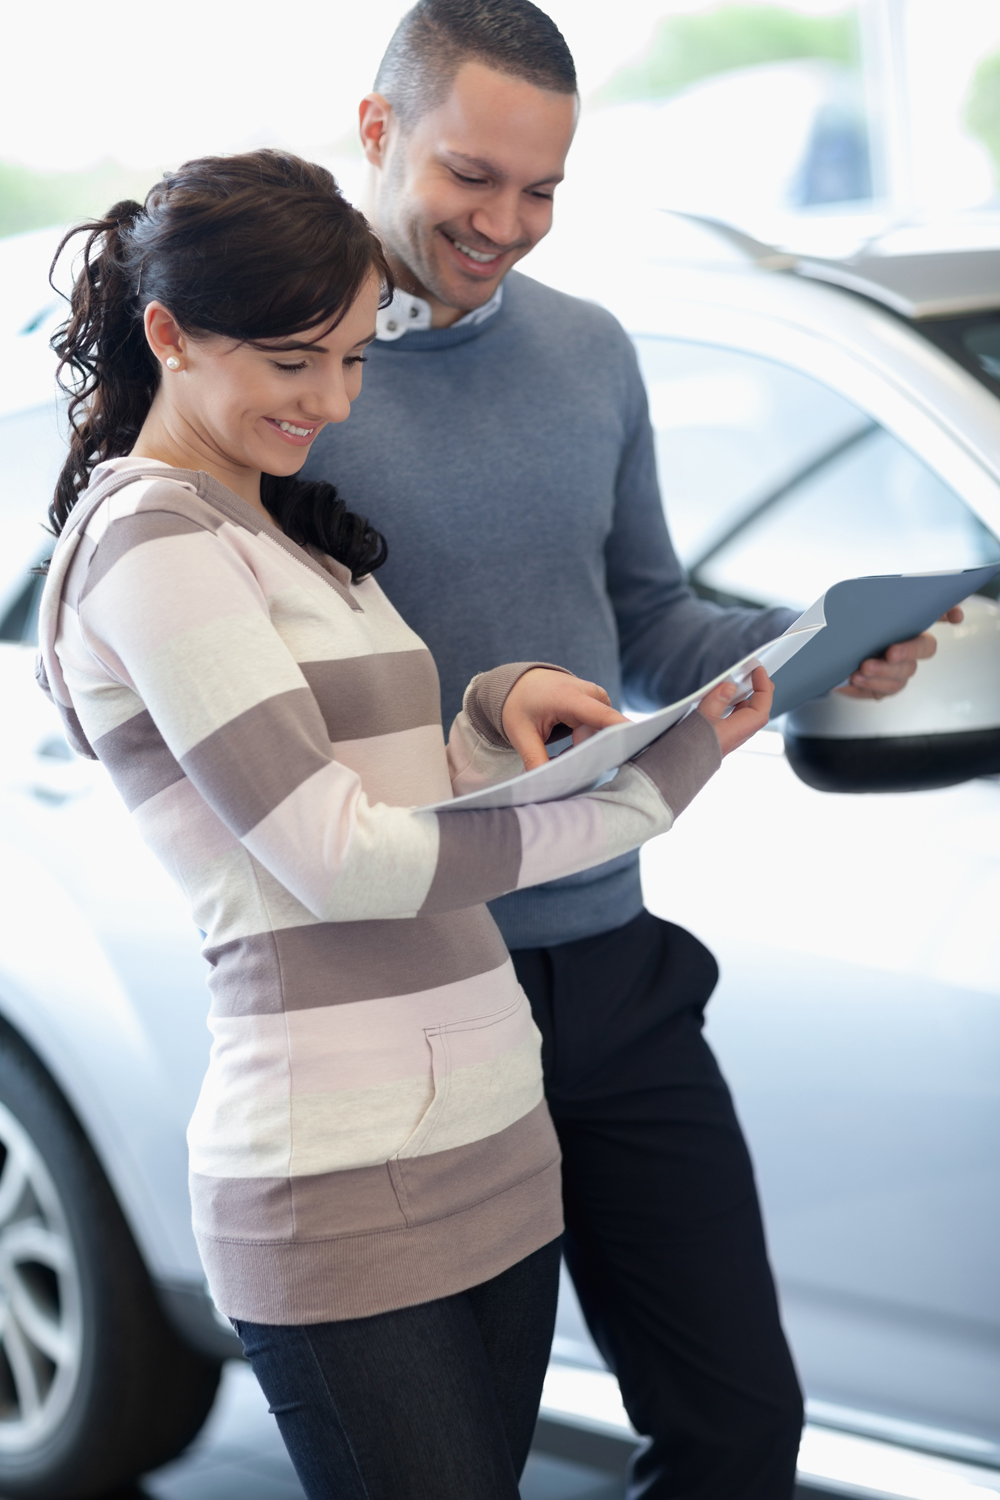 Building Your Credit With Bad Credit Car Loans